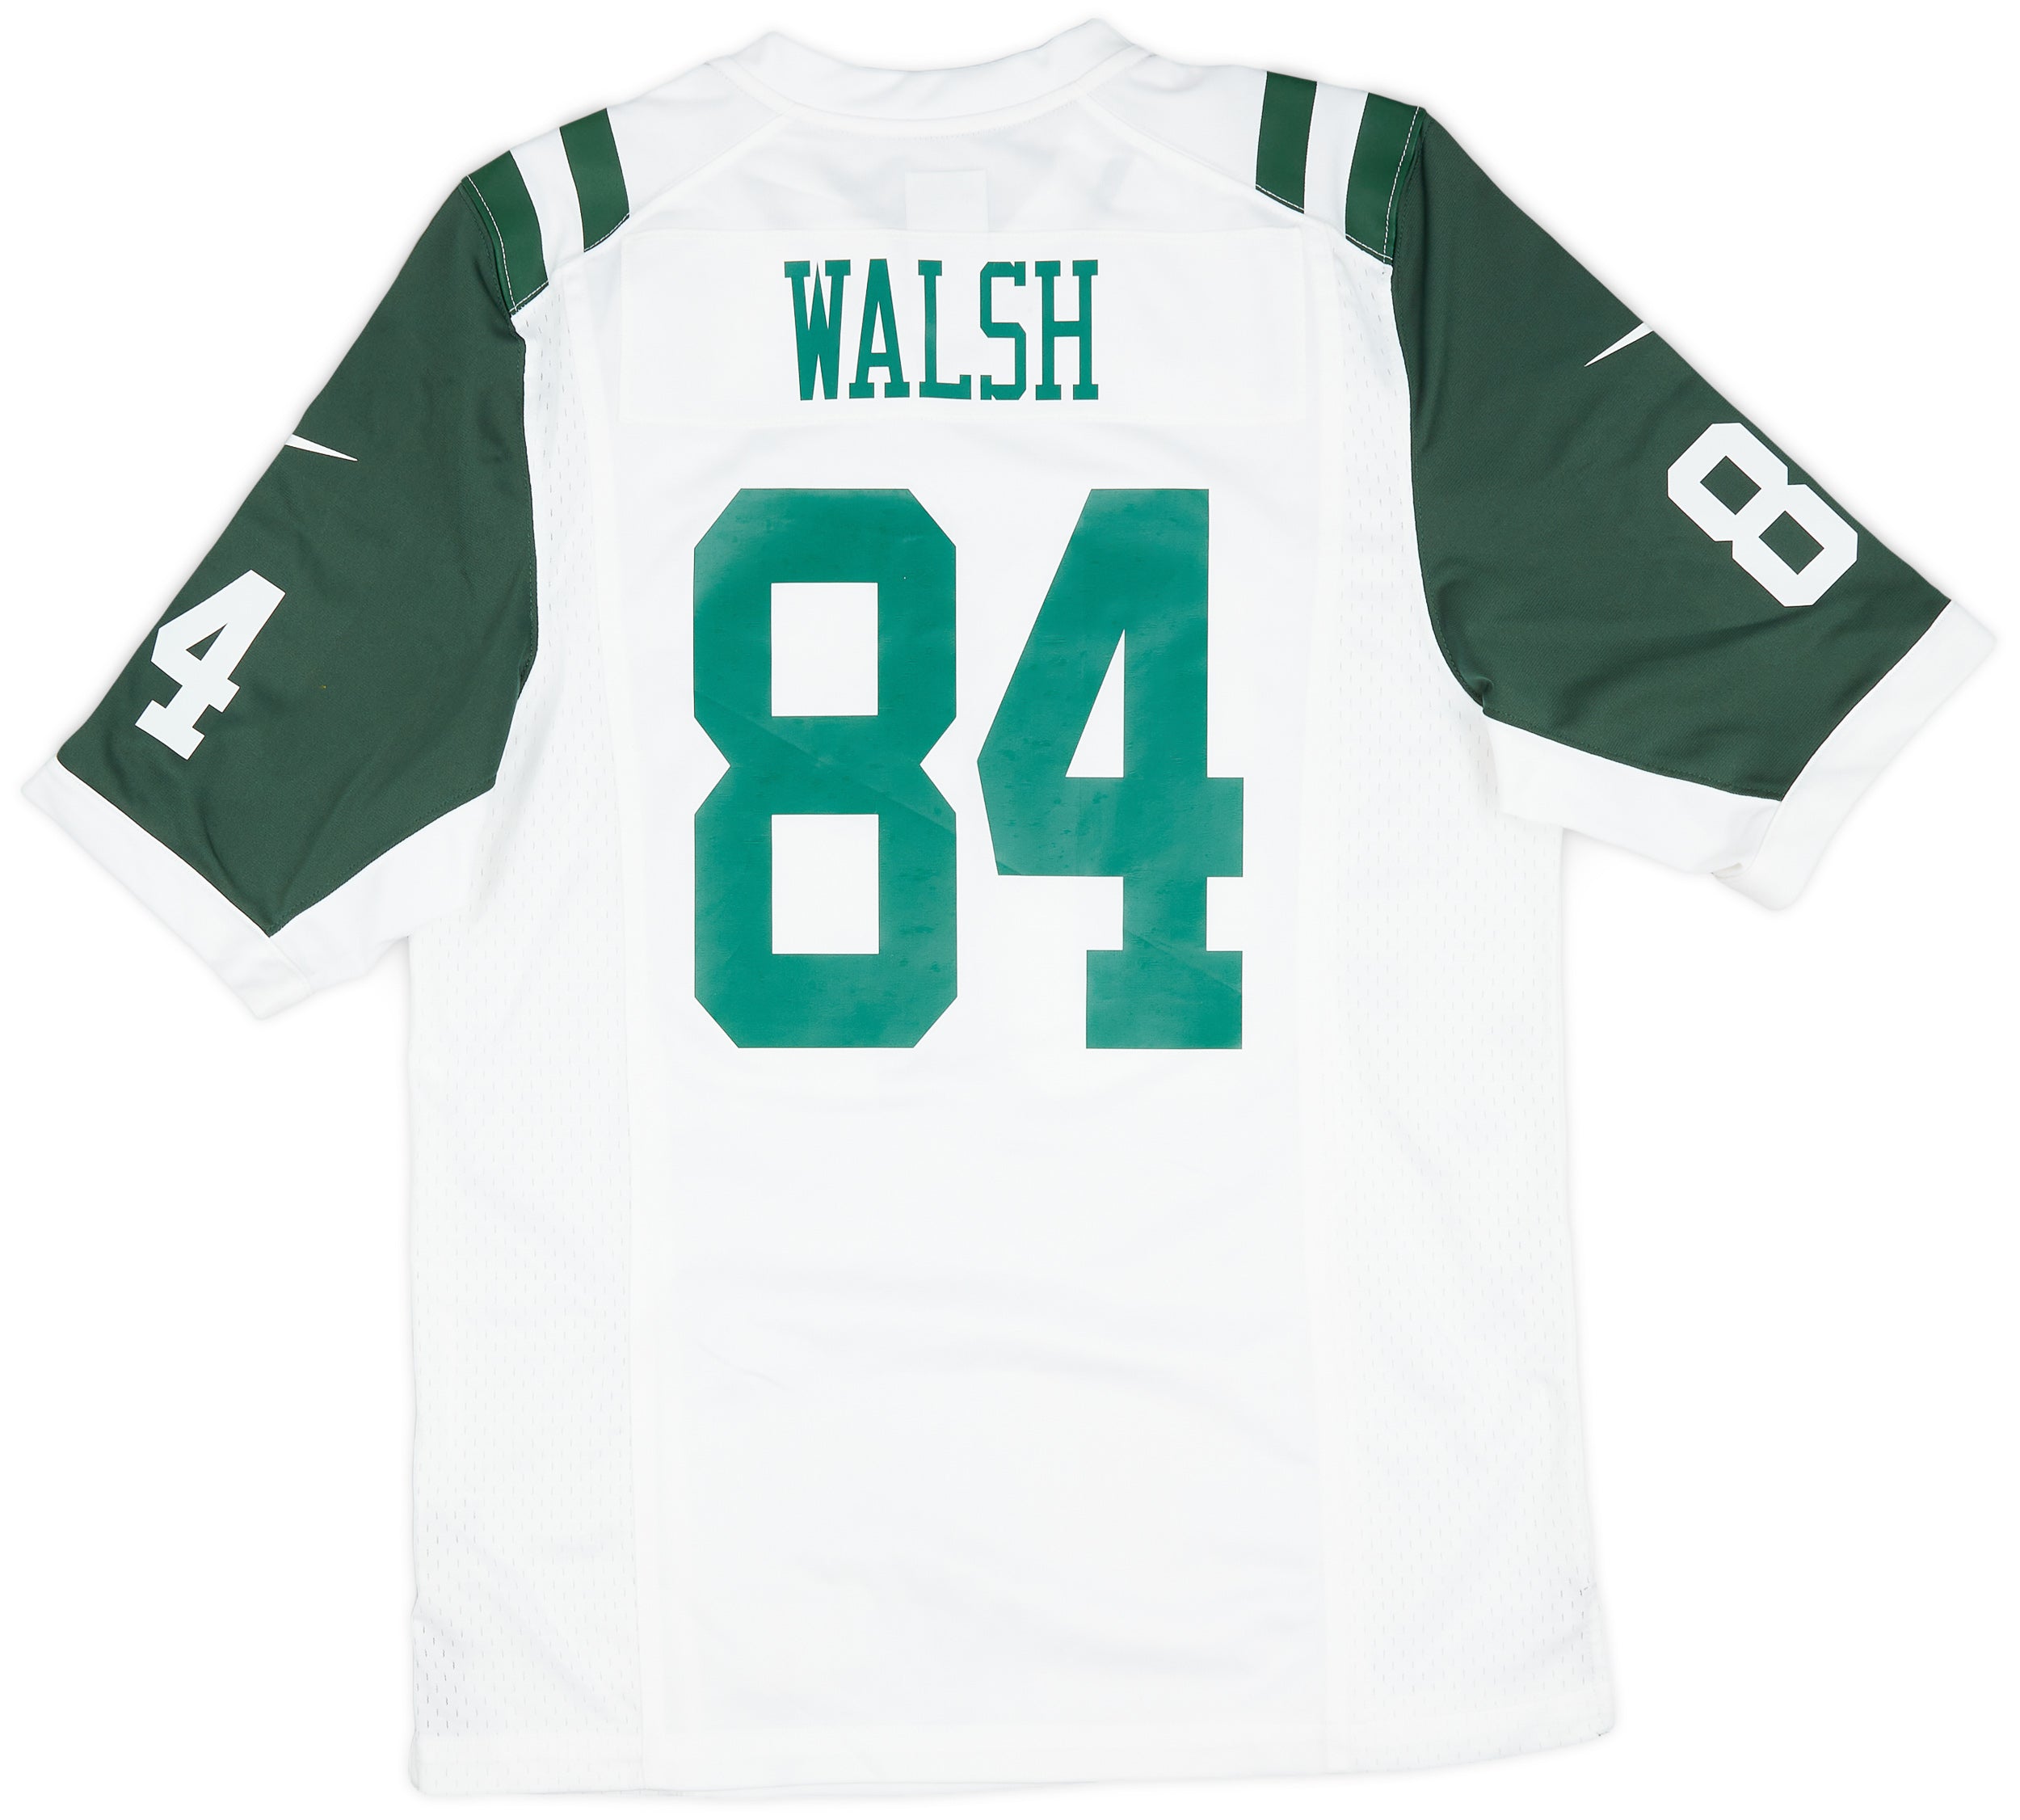 Shop new limited-edition NY Jets throwback jerseys now